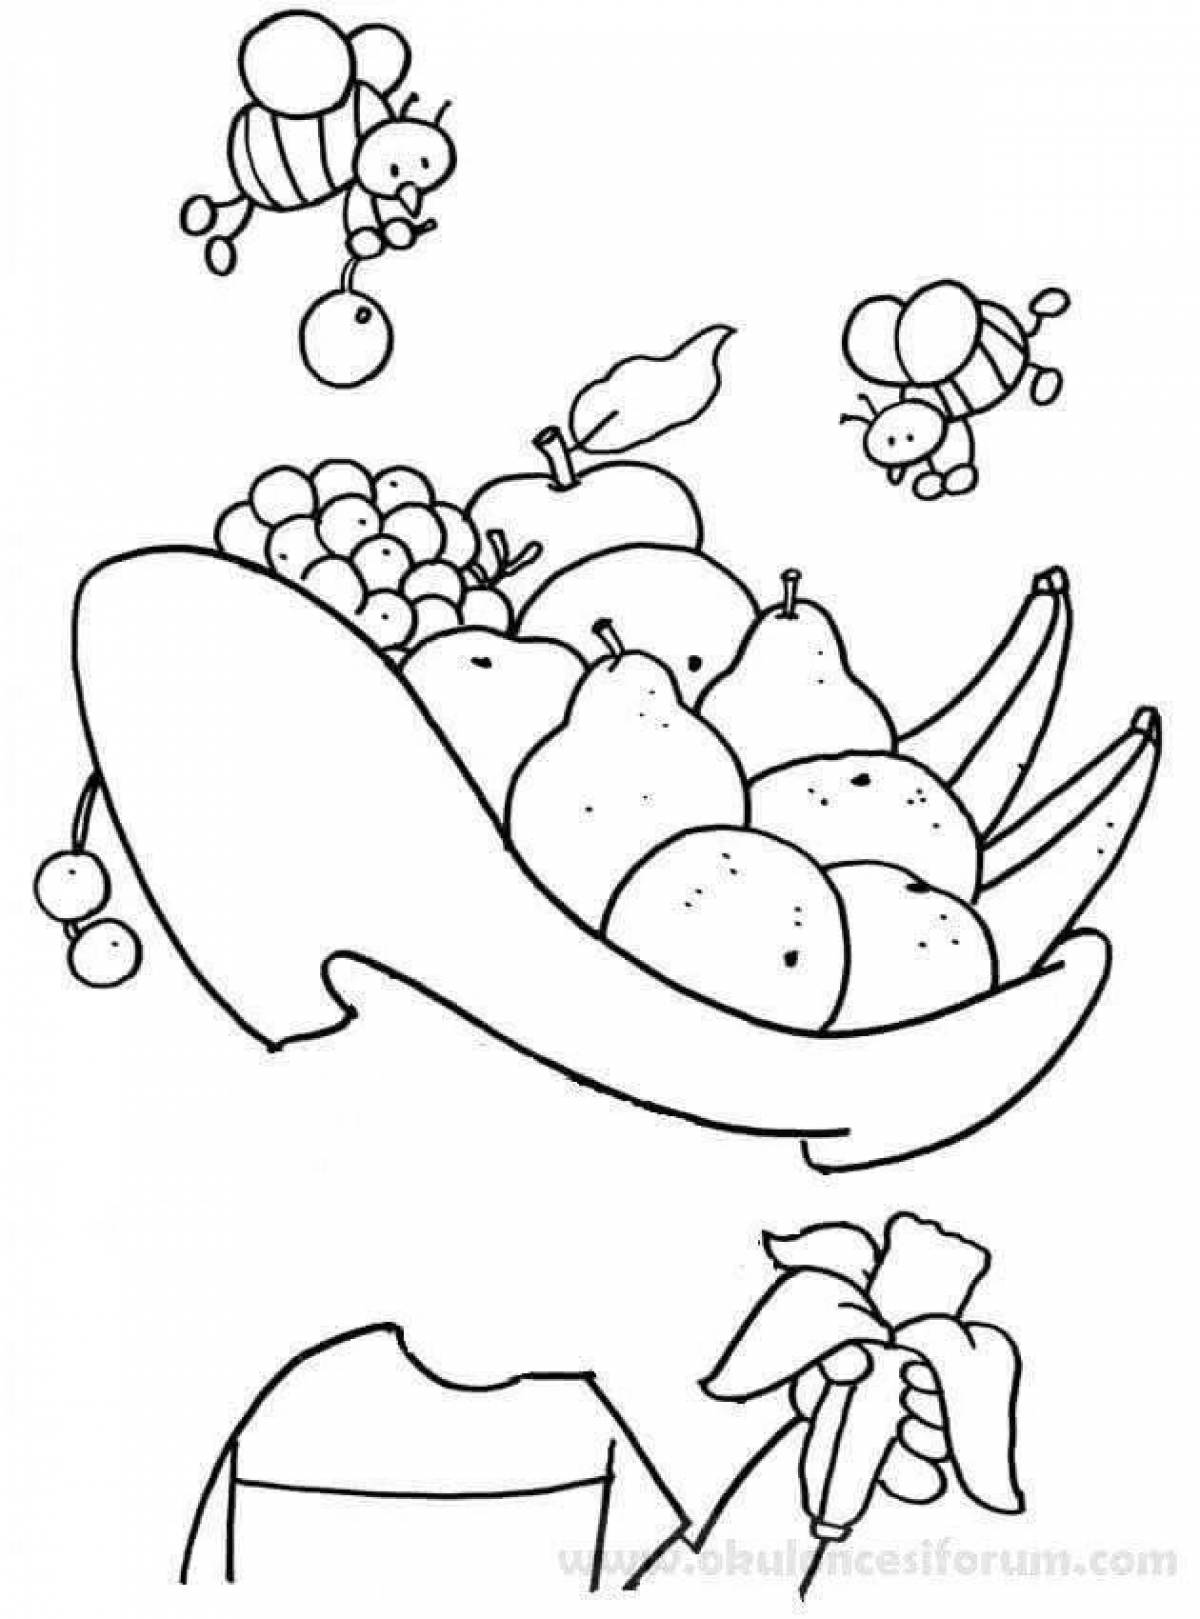 Fancy healthy food coloring book for kids